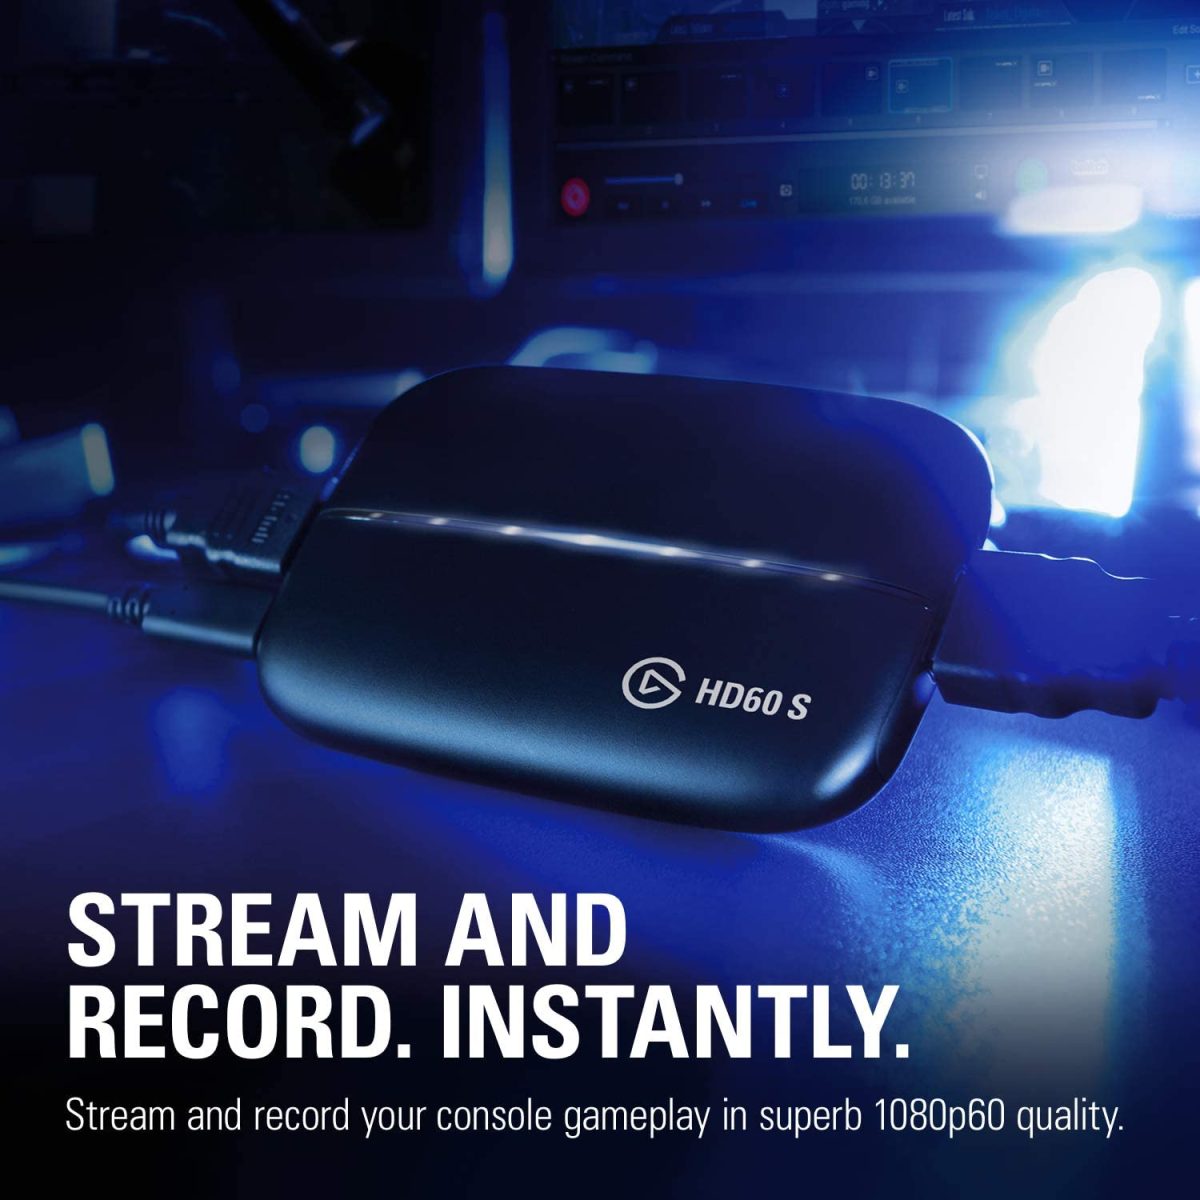 71Mvvozxrwl. Ac Sl1500 &Lt;H1&Gt;Elgato Game Capture Hd60S - Black&Lt;/H1&Gt; &Lt;Ul&Gt; &Lt;Li&Gt;&Lt;Span Class=&Quot;A-List-Item&Quot;&Gt; Elgato Game Capture Hd60 S, Stream And Record In 1080P60, For Playstation 4, Xbox One, Xbox 360 &Amp; Wii U &Lt;/Span&Gt;&Lt;/Li&Gt; &Lt;Li&Gt;&Lt;Span Class=&Quot;A-List-Item&Quot;&Gt; Stream And Record Your Finest Gaming Moment. Stunning 1080P Quality With 60 Fps. Supported Resolutions - 1080P60, 1080P30, 1080I, 720P60, 720P30, 576P, 576I And 480P &Lt;/Span&Gt;&Lt;/Li&Gt; &Lt;Li&Gt;&Lt;Span Class=&Quot;A-List-Item&Quot;&Gt; State-Of-The-Art Usb 3.0 Type C Connection. Built-In Live Streaming To Twitch, Youtube &Amp; More. Instant Gameview: Stream With Superior Low Latency Technology &Lt;/Span&Gt;&Lt;/Li&Gt; &Lt;Li&Gt;&Lt;Span Class=&Quot;A-List-Item&Quot;&Gt; The Built-In Live Streaming Feature Gets You Up And Running On Twitch Or Youtube In A Snap. With Stream Command, Customize Your Stream Layout Without Limits. Add Your Webcam, Overlays, Alerts And More And Change Your Stream Layout On-The-Fly With Scenes. Add Your Voice With The Built-In Live Commentary Feature &Lt;/Span&Gt;&Lt;/Li&Gt; &Lt;Li&Gt;&Lt;Span Class=&Quot;A-List-Item&Quot;&Gt; Supported Os - Windows 10 (64-Bit). Macos Sierra 10.12 Or Later &Lt;/Span&Gt;&Lt;/Li&Gt; &Lt;/Ul&Gt; Game Capture Elgato Game Capture Hd60S - Black